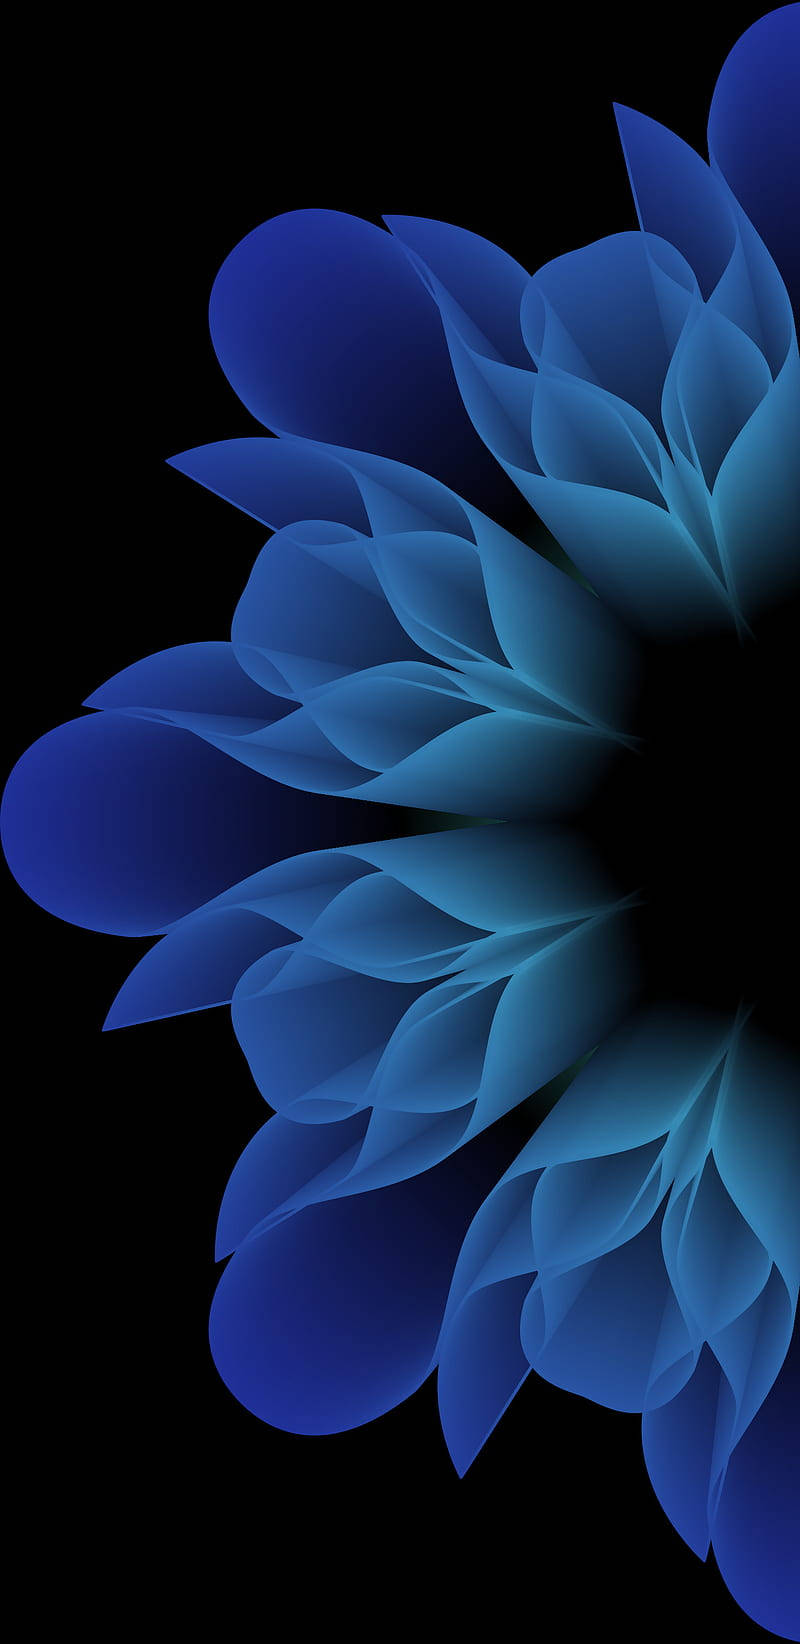 Download Blue Roses On Samsung Galaxy Note 7 Wallpaper 